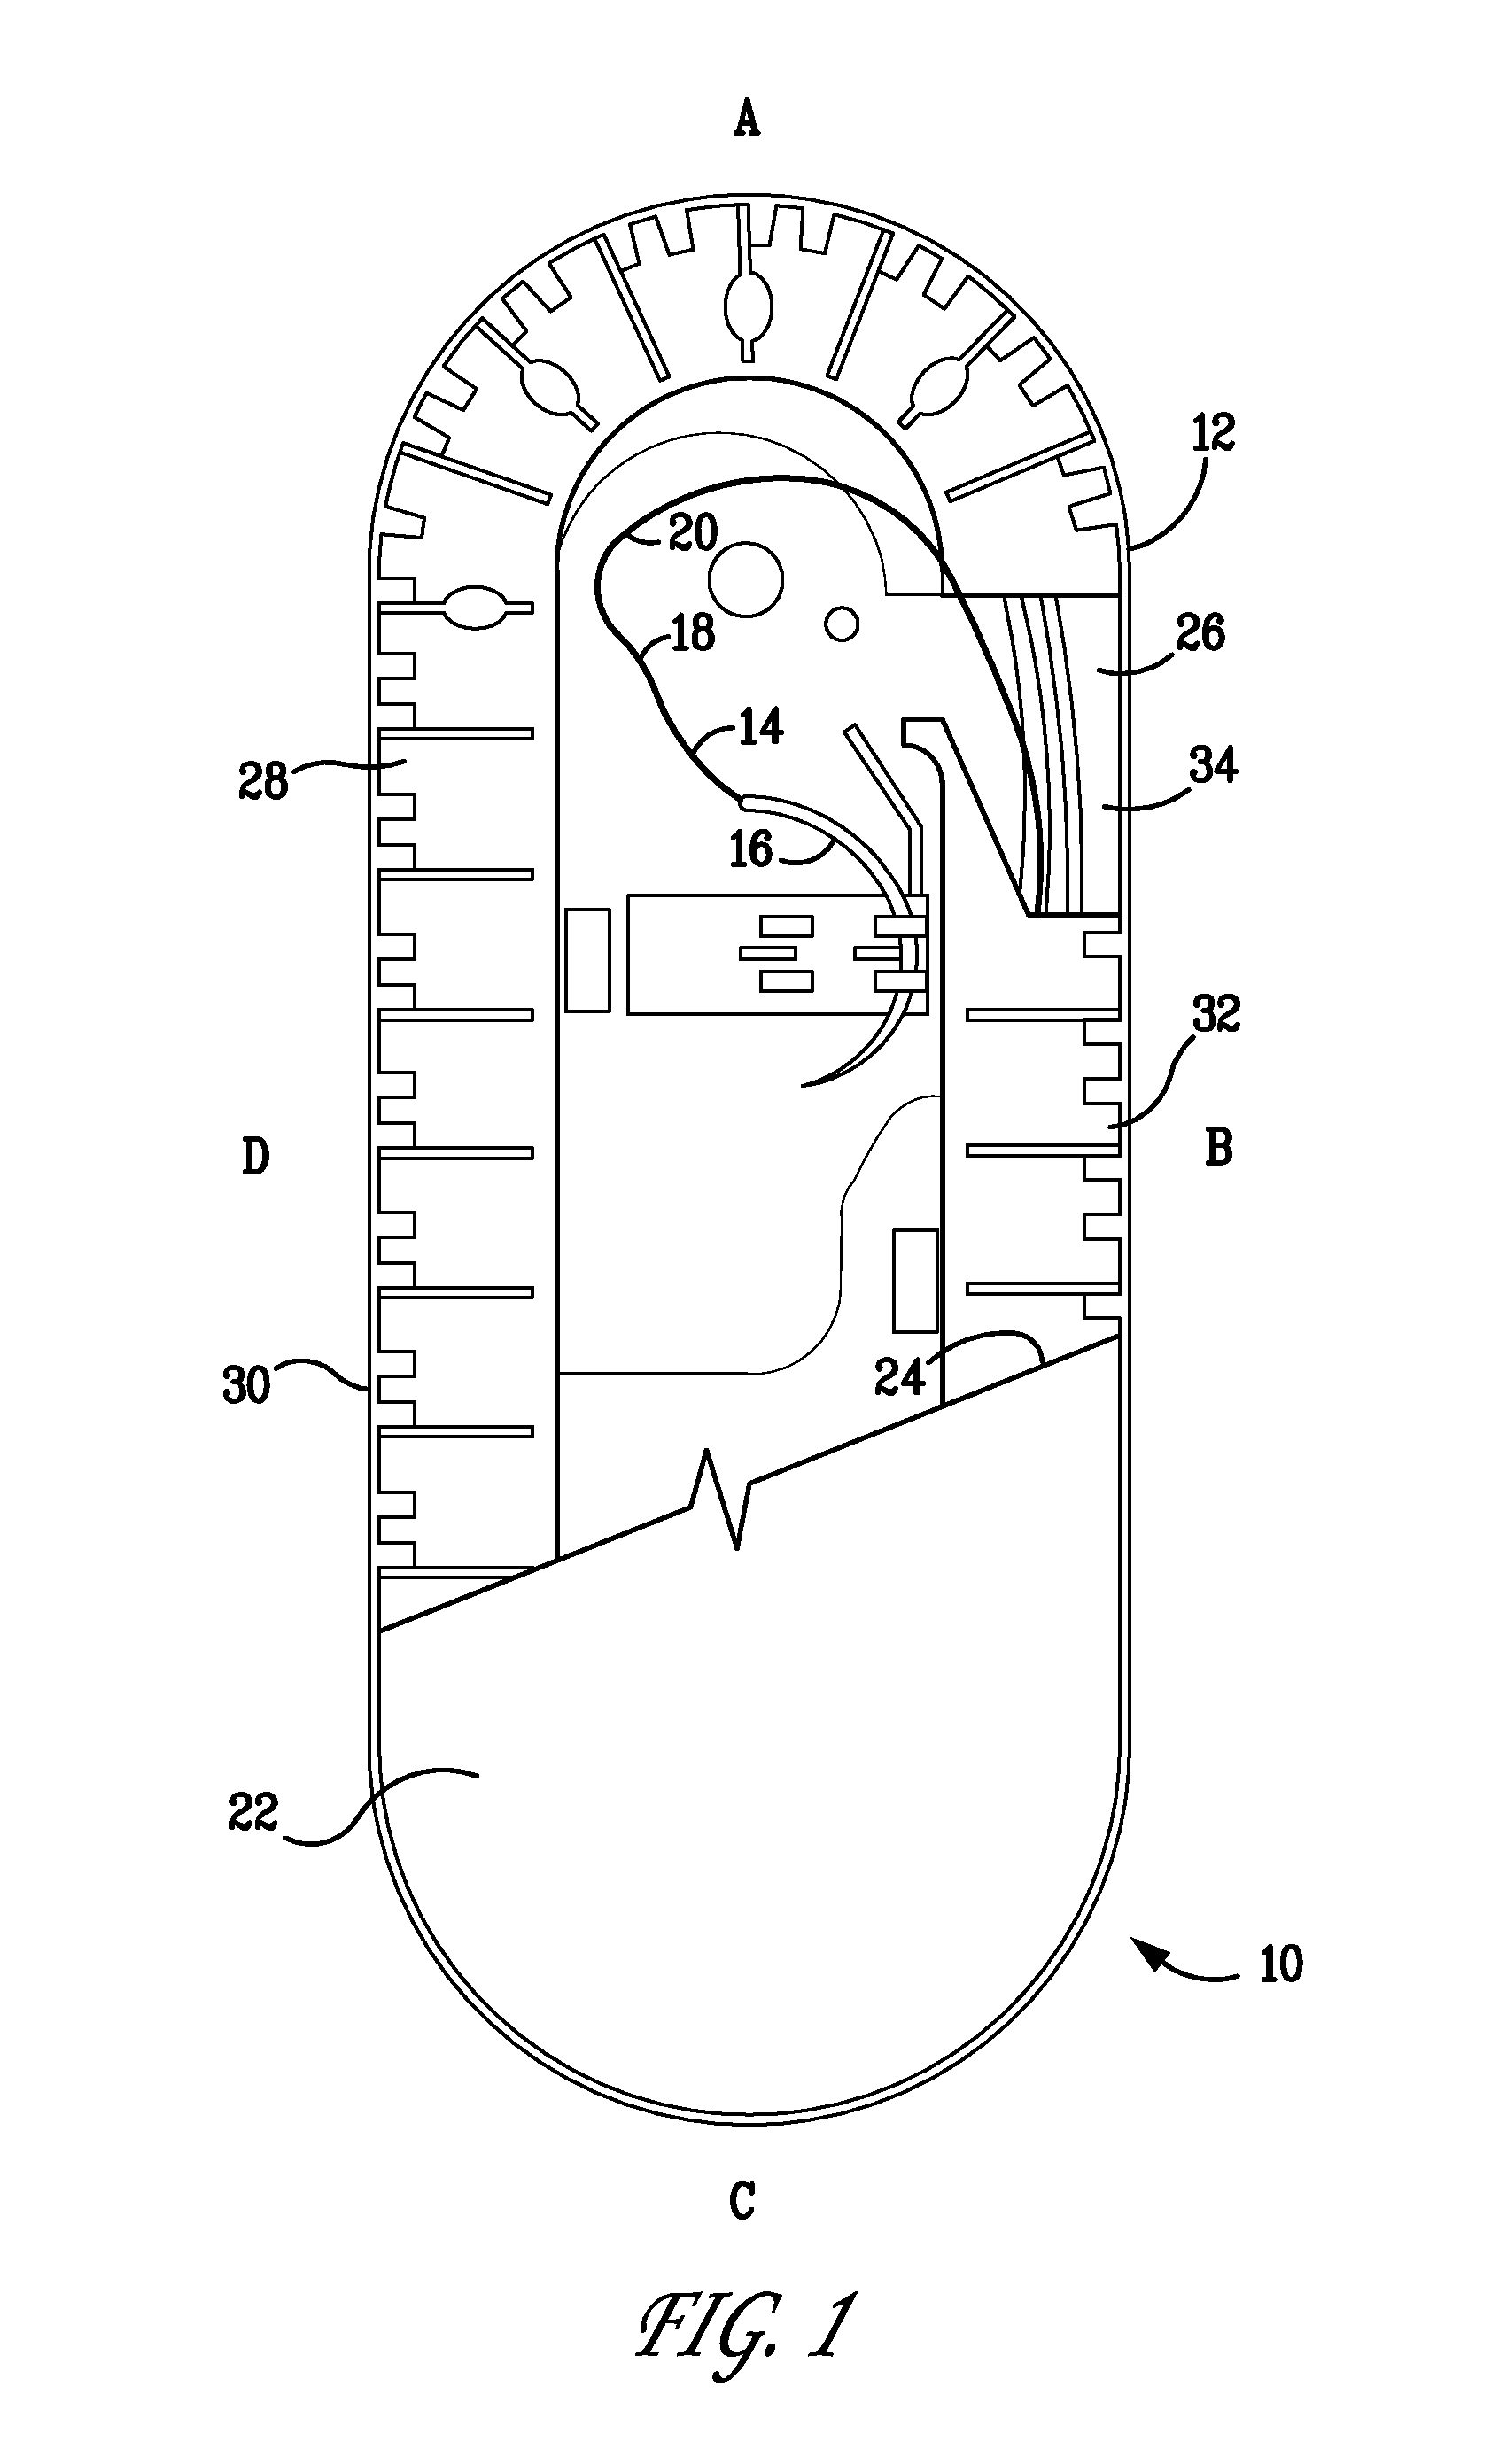 Packaged antimicrobial medical device and method of preparing same